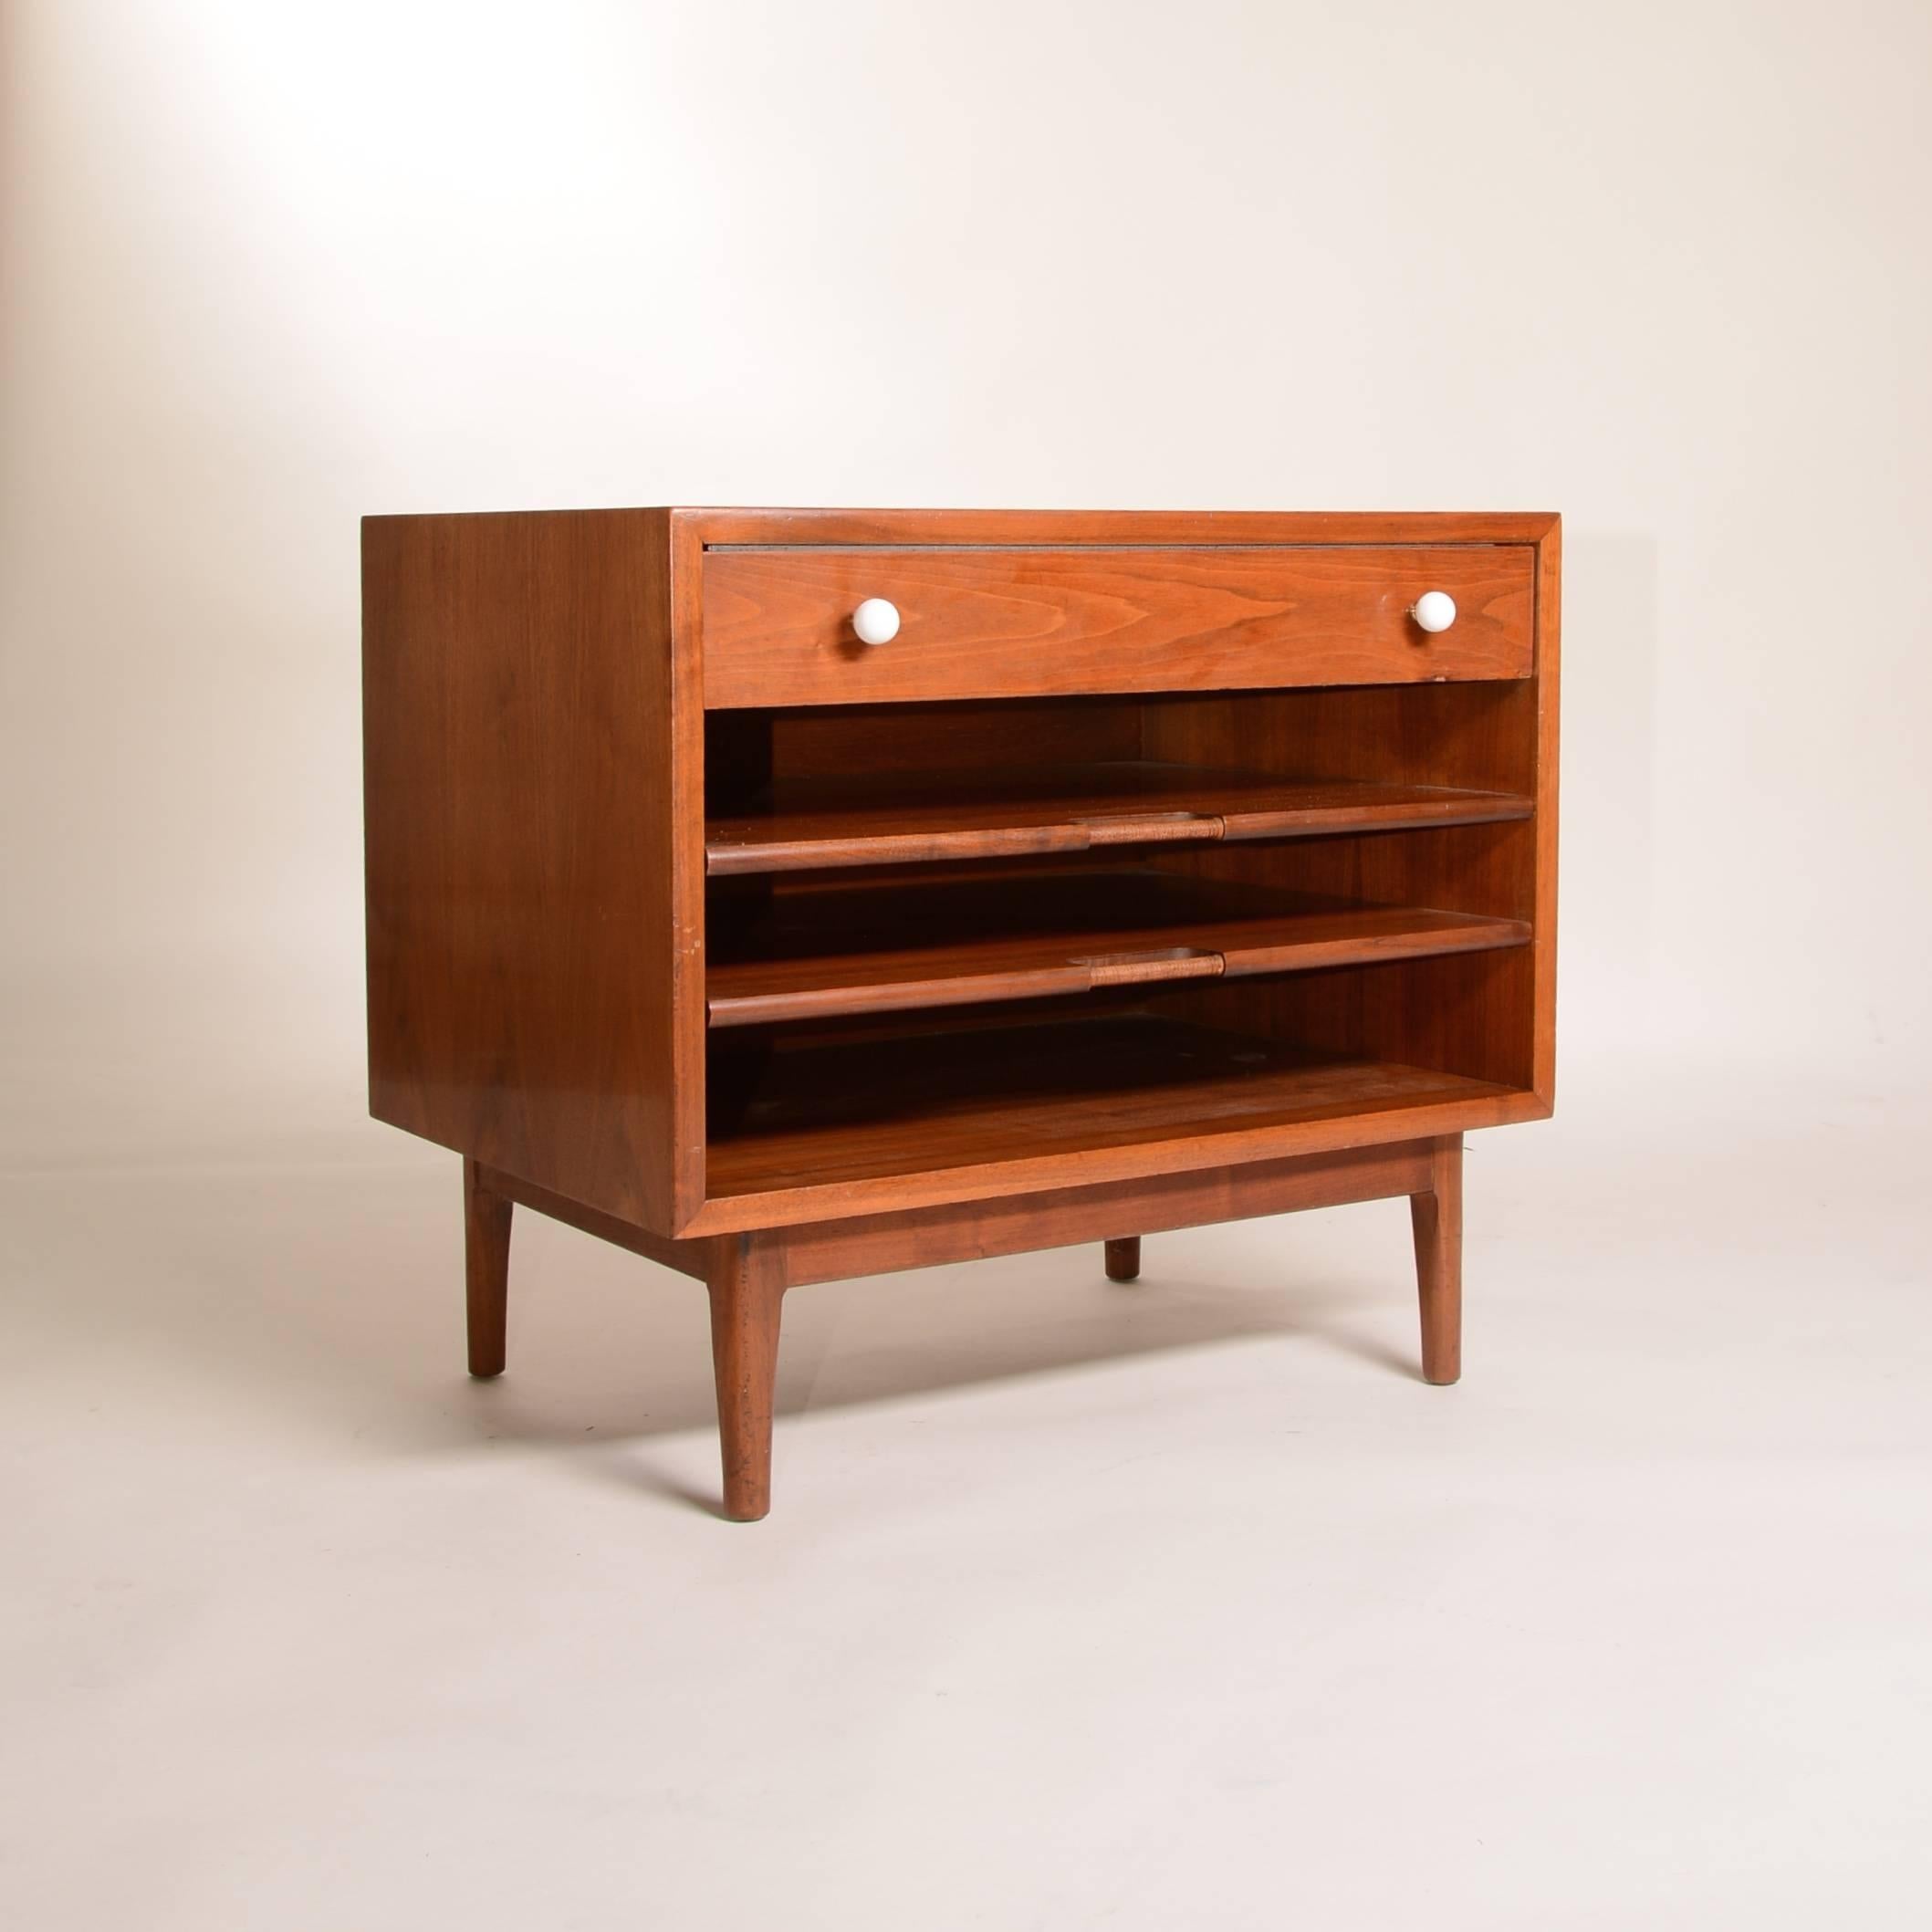 A gorgeous walnut side table designed by Kipp Stewart for Drexel. It features pull out shelves, perfect for magazines, newspapers and books, and an upper drawer. Works beautiful as a nightstand, or as a clever accent in your living room.